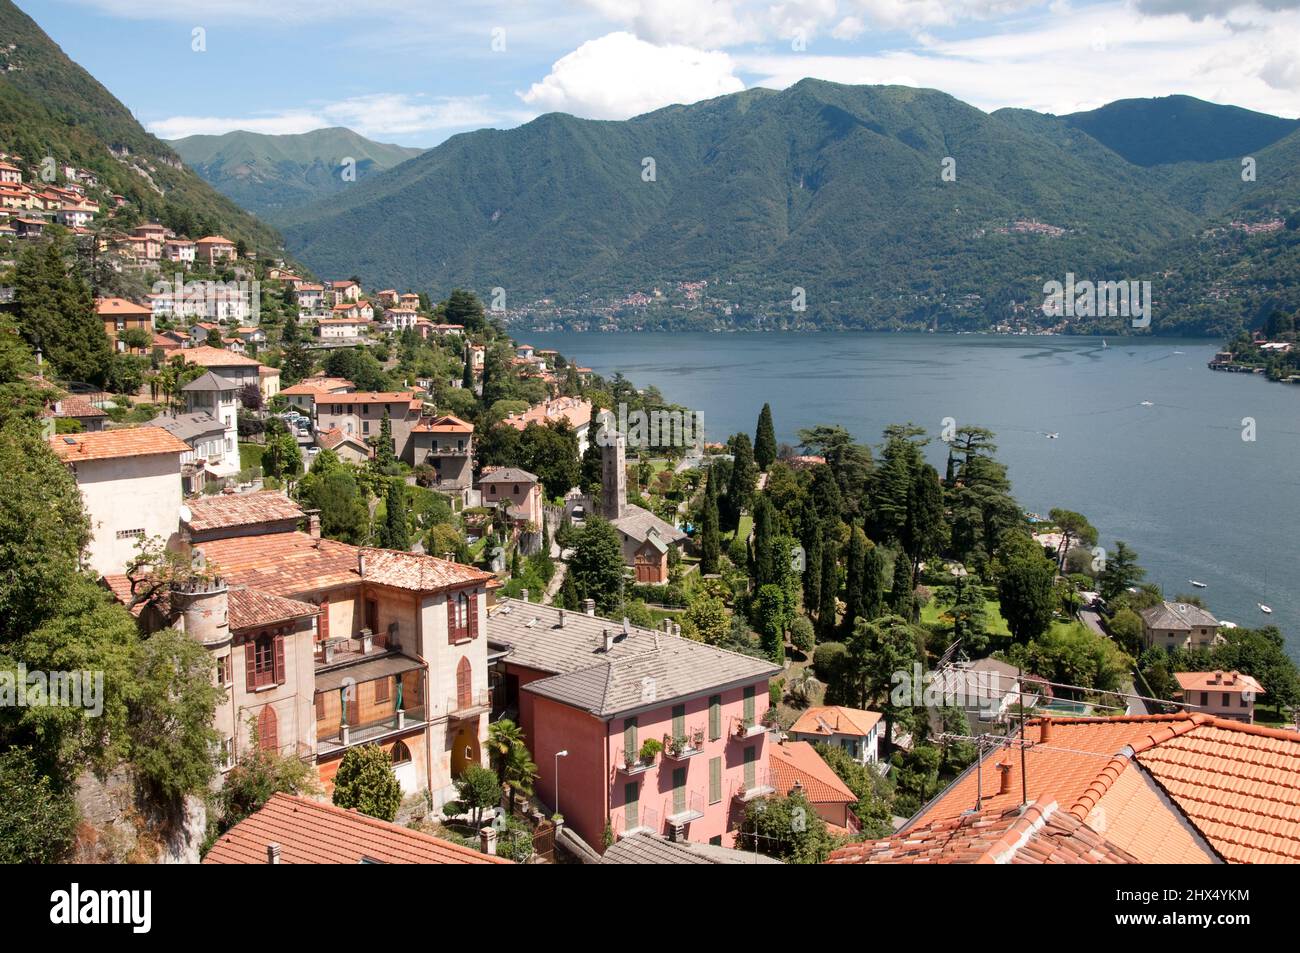 Back Roads Northern Italy - Drive 4, Back Roads Northern Italy, Italy, Lombardy, Lake Como, lake views from Moltrasio Stock Photo